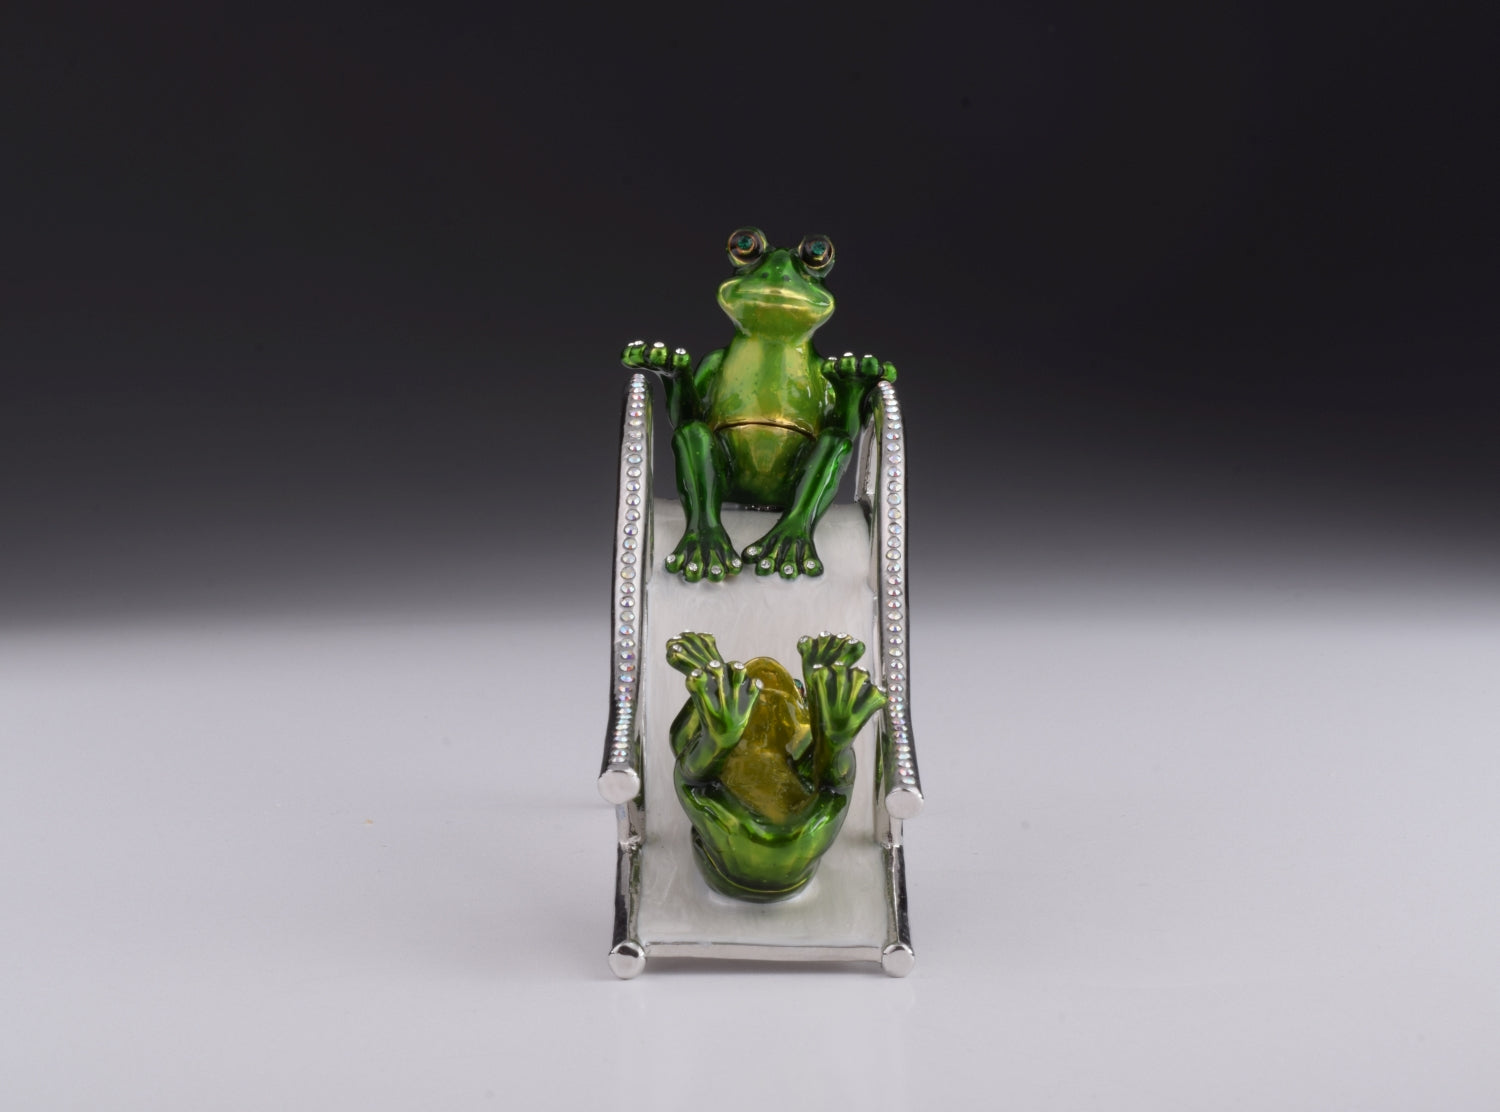 Two Frogs Riding Slide